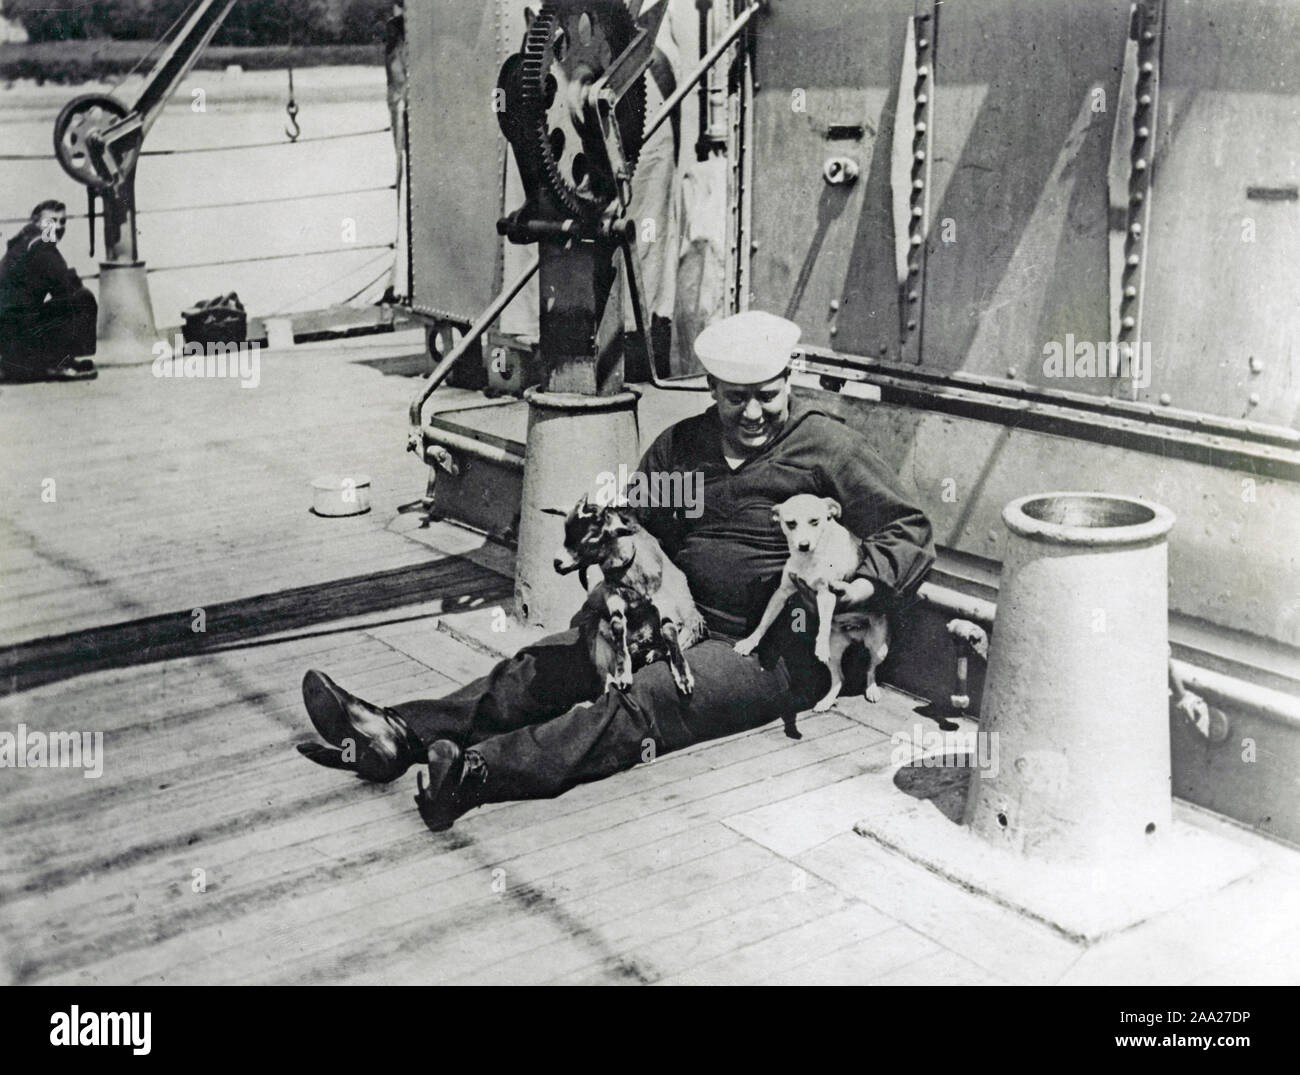 World war one. A dog and a goat are mascots on this american warship. A sailor is sitting on deck with the two animals who according to the caption, refuse to be friends. 1916 Stock Photo